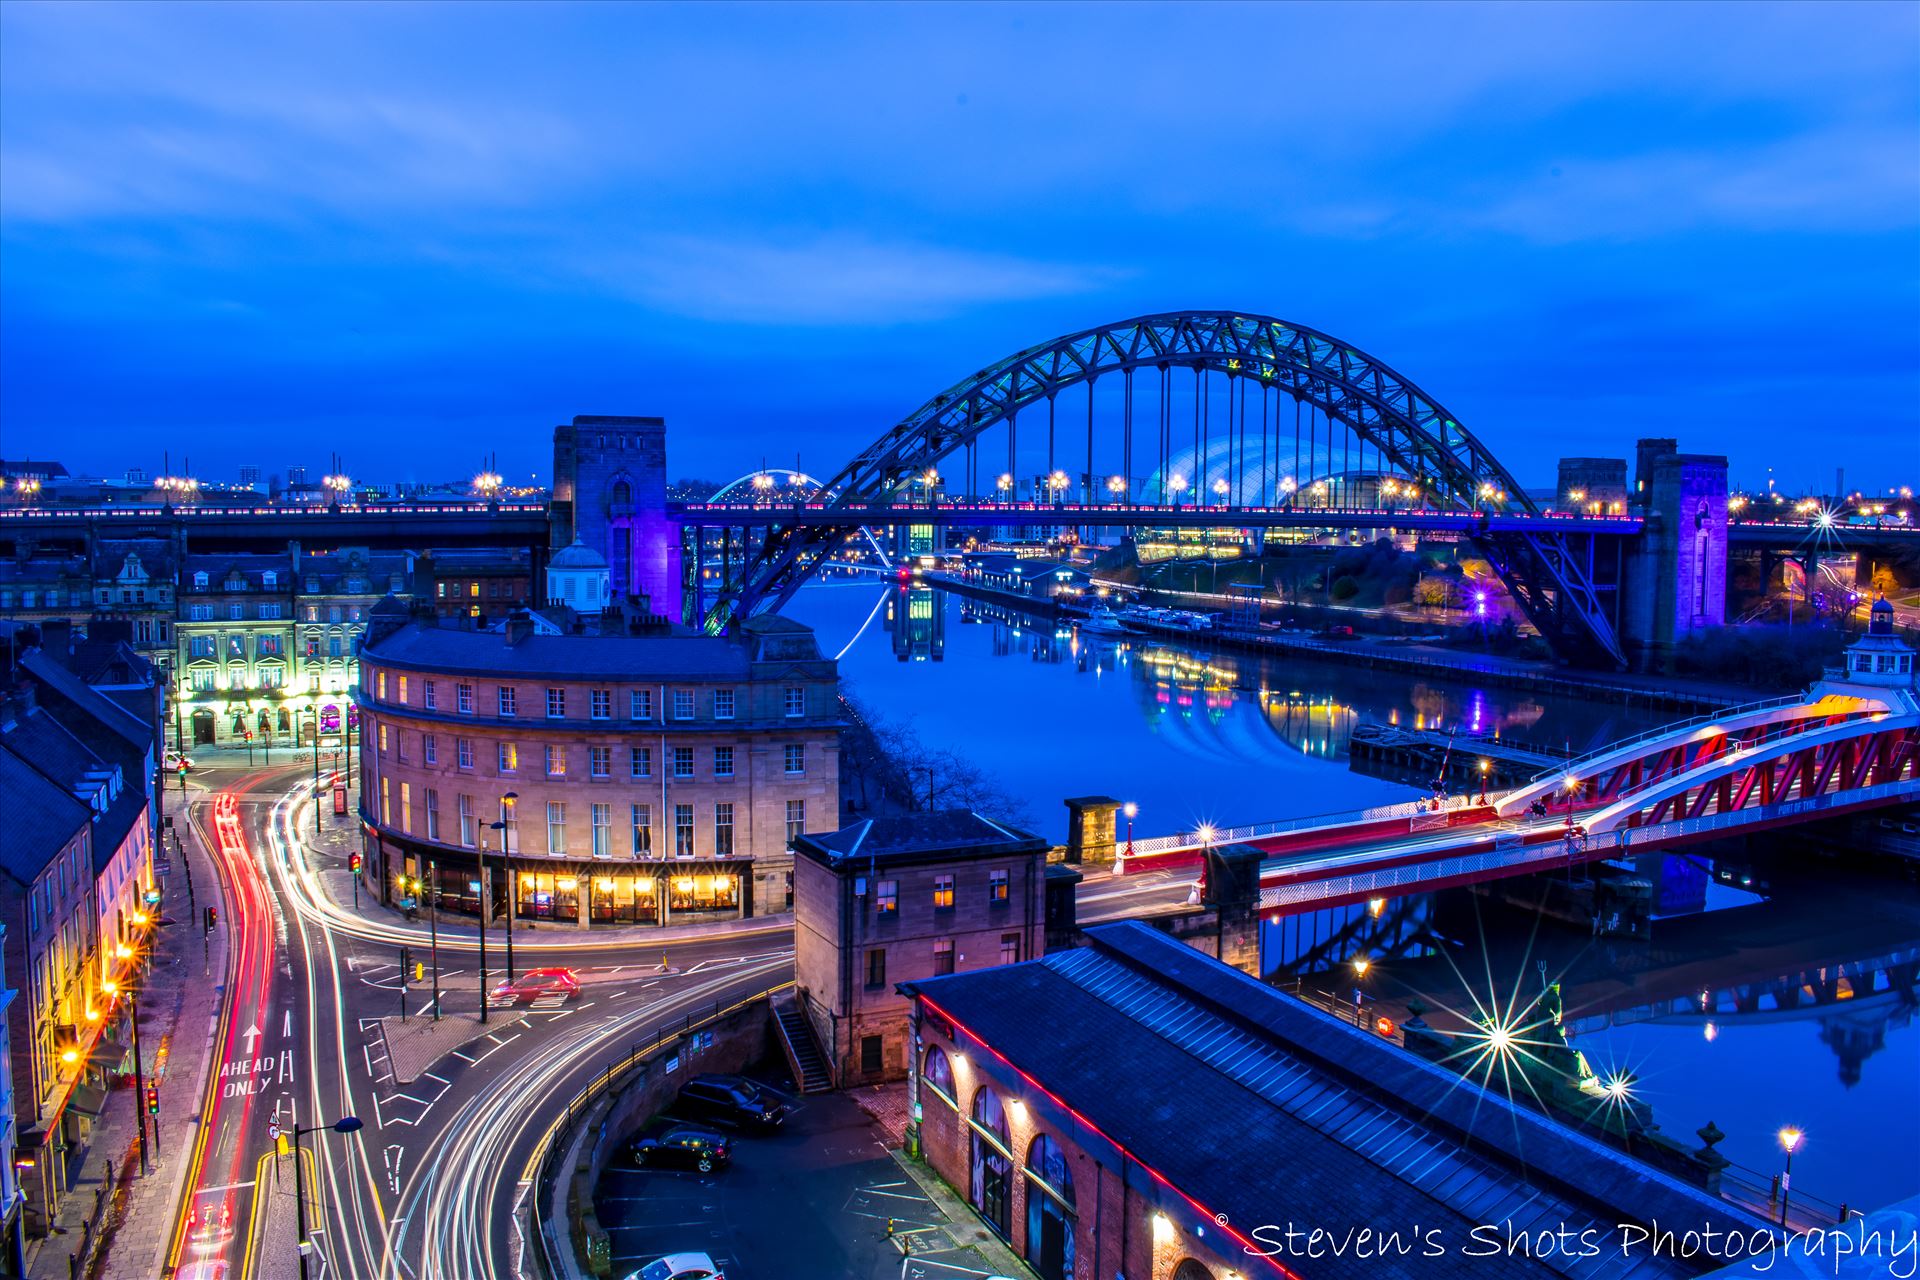 Swing Bridge and Tyne Bridge with traffic on the quayside A long exposure shot from the high level bridge in Newcastle, showing the Tyne Bridge and Swing Bridge with traffic down on the quayside. by Steven's Shots Photography